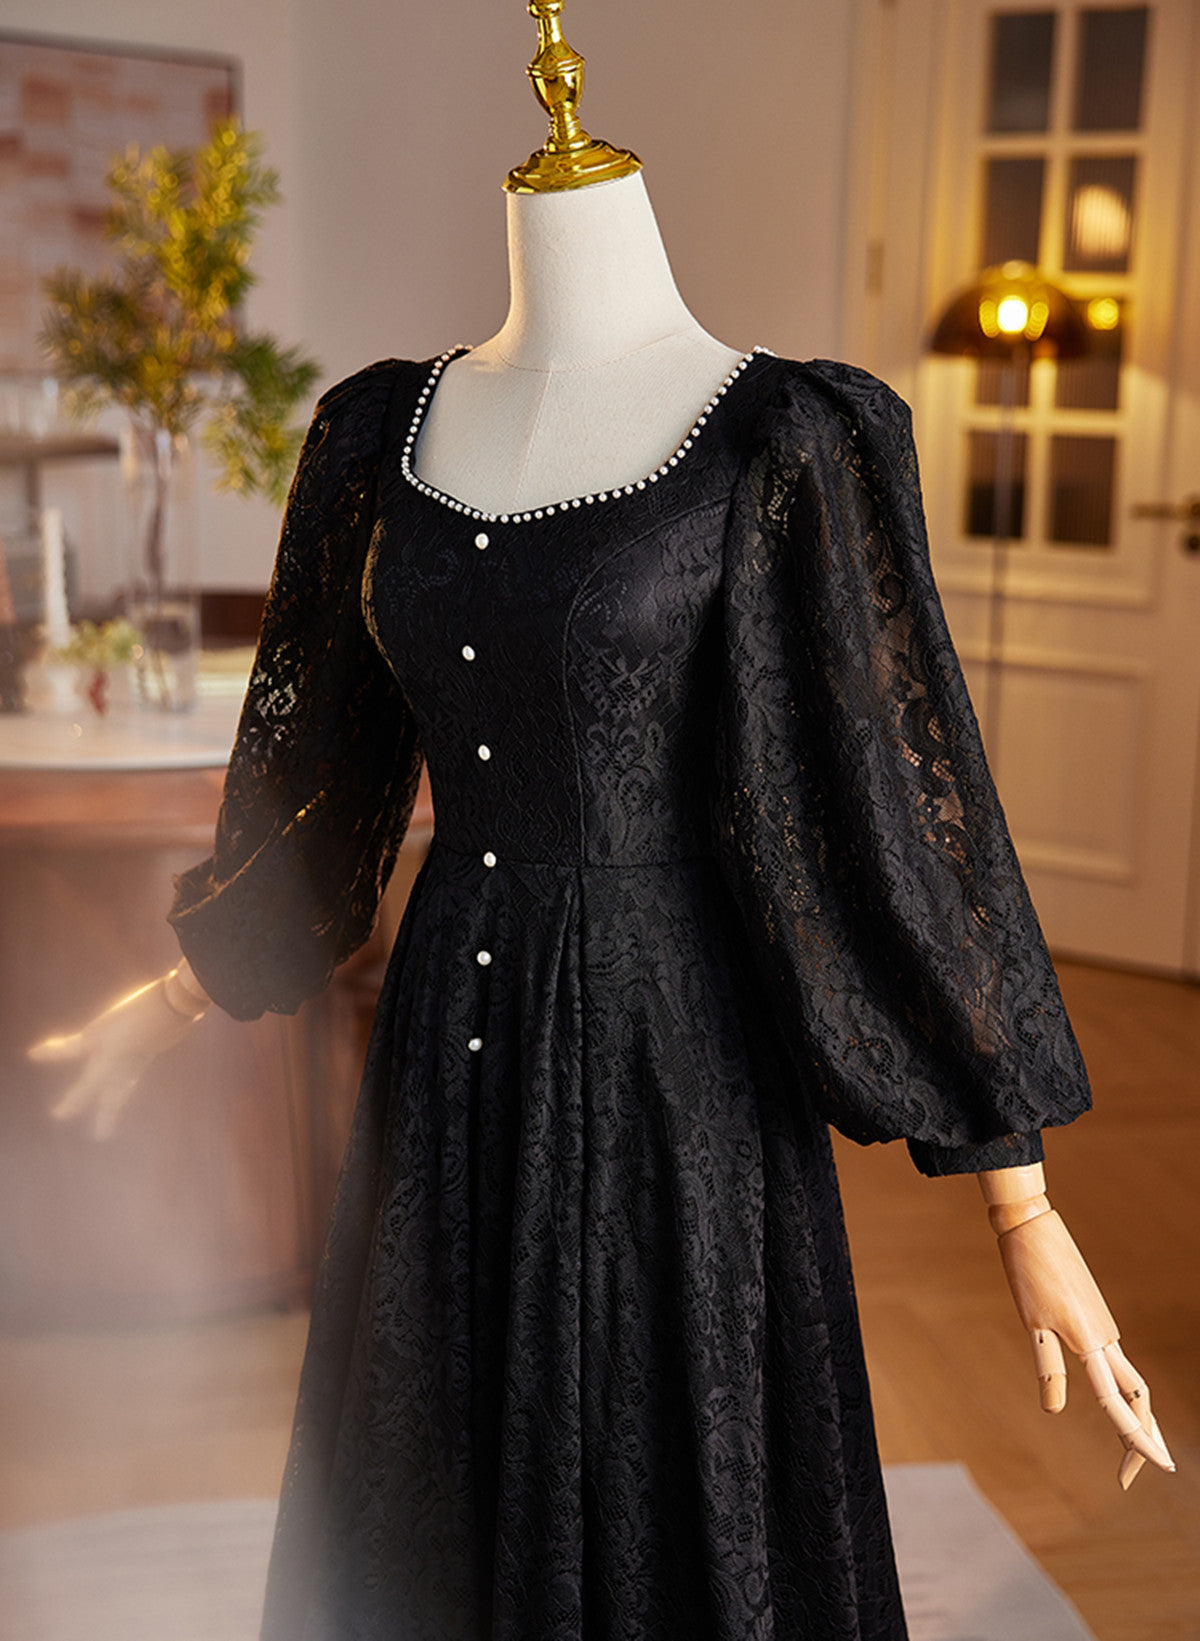 Black Long Sleeves Lace A-line Party Dress, Black Lace Wedding Party Dress